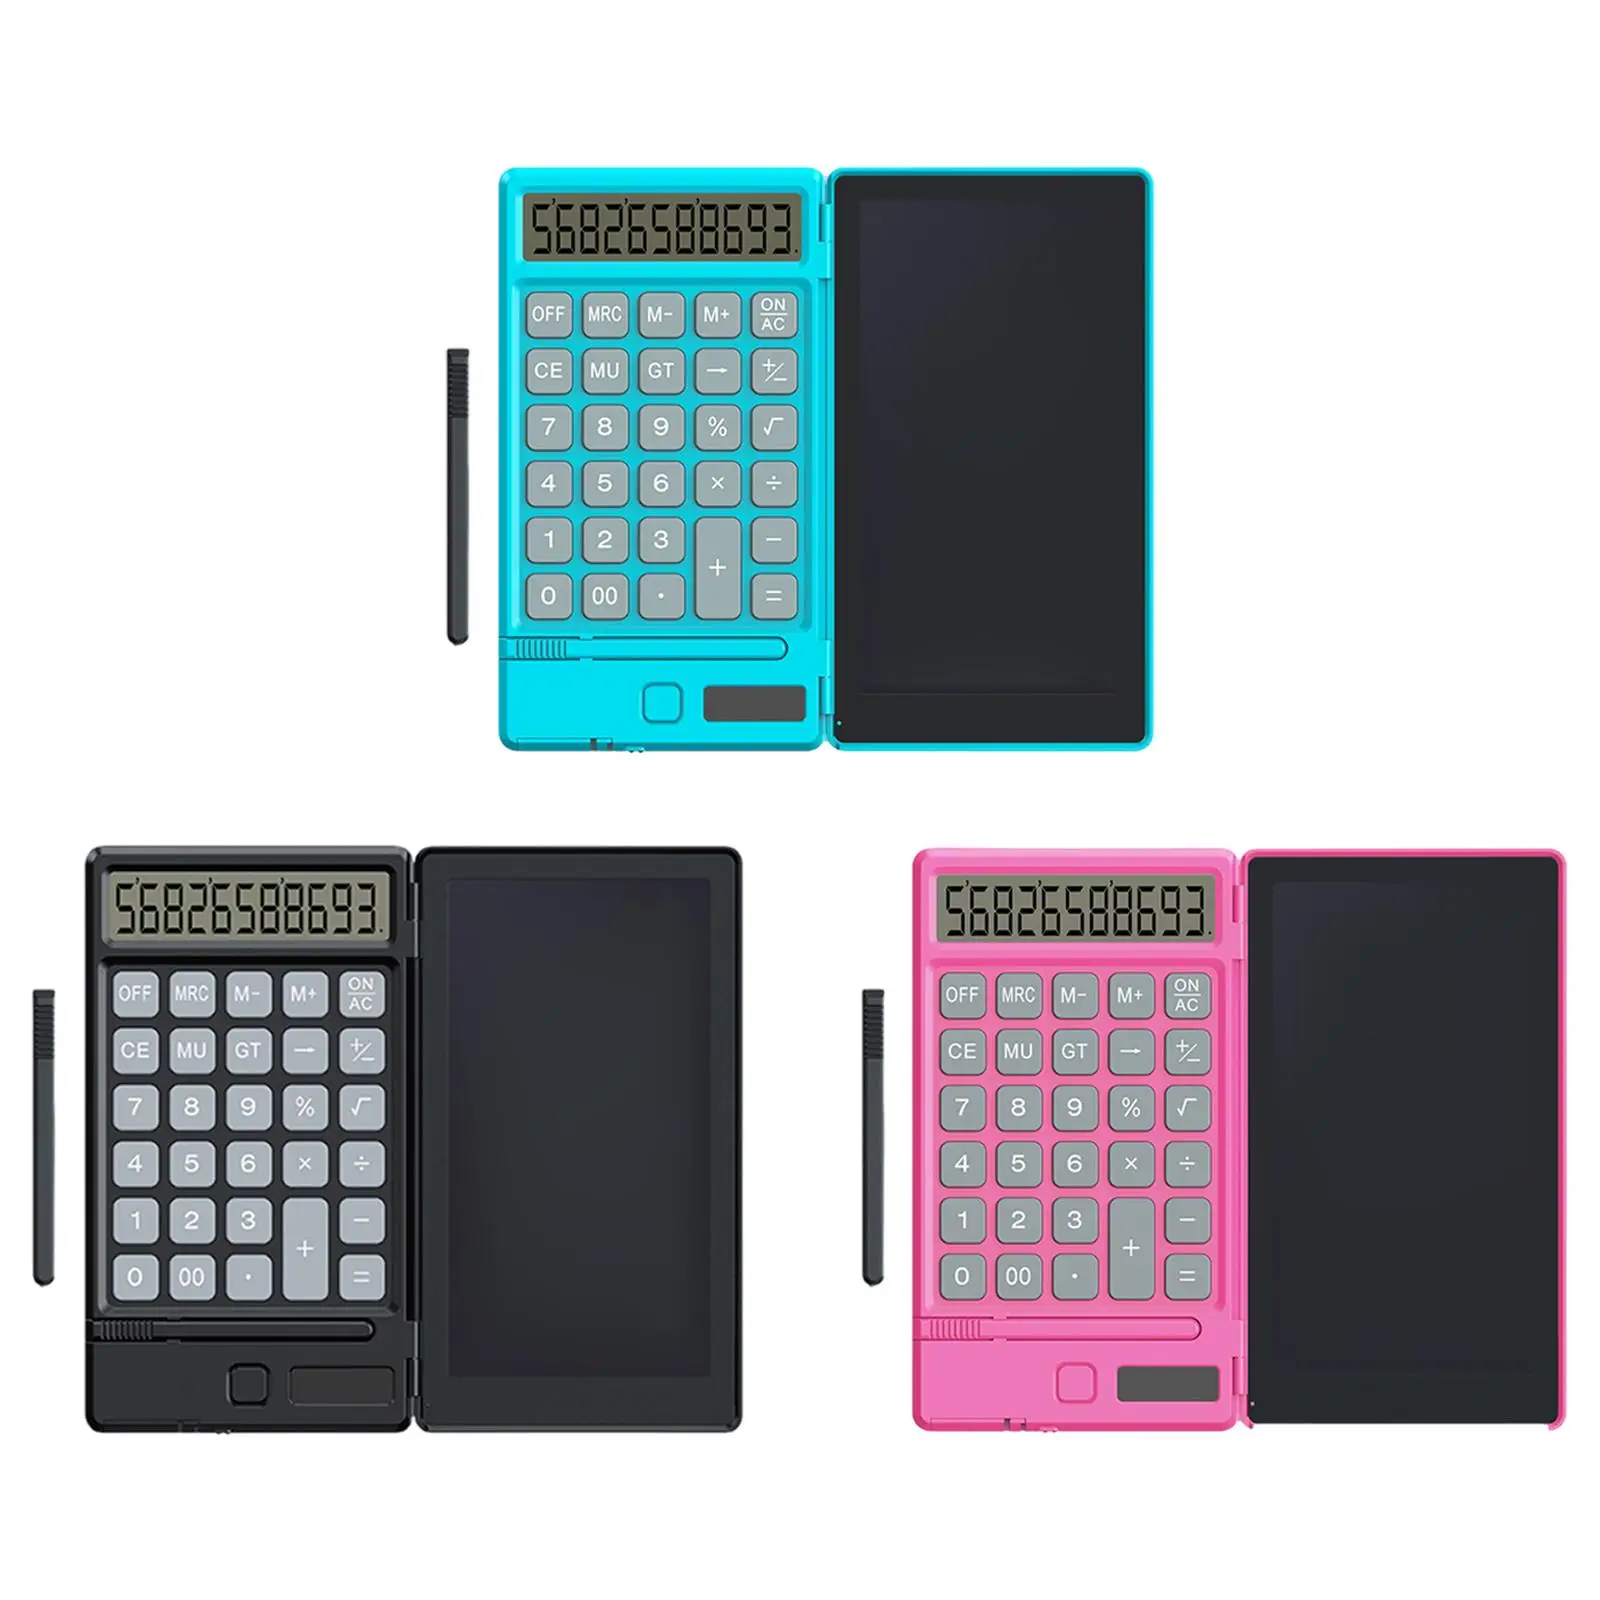 

Mute Portable Calculator Writing Tablet 12 Digit Large Display LCD Desktop Calculators for Planning Accounting Calculations Work